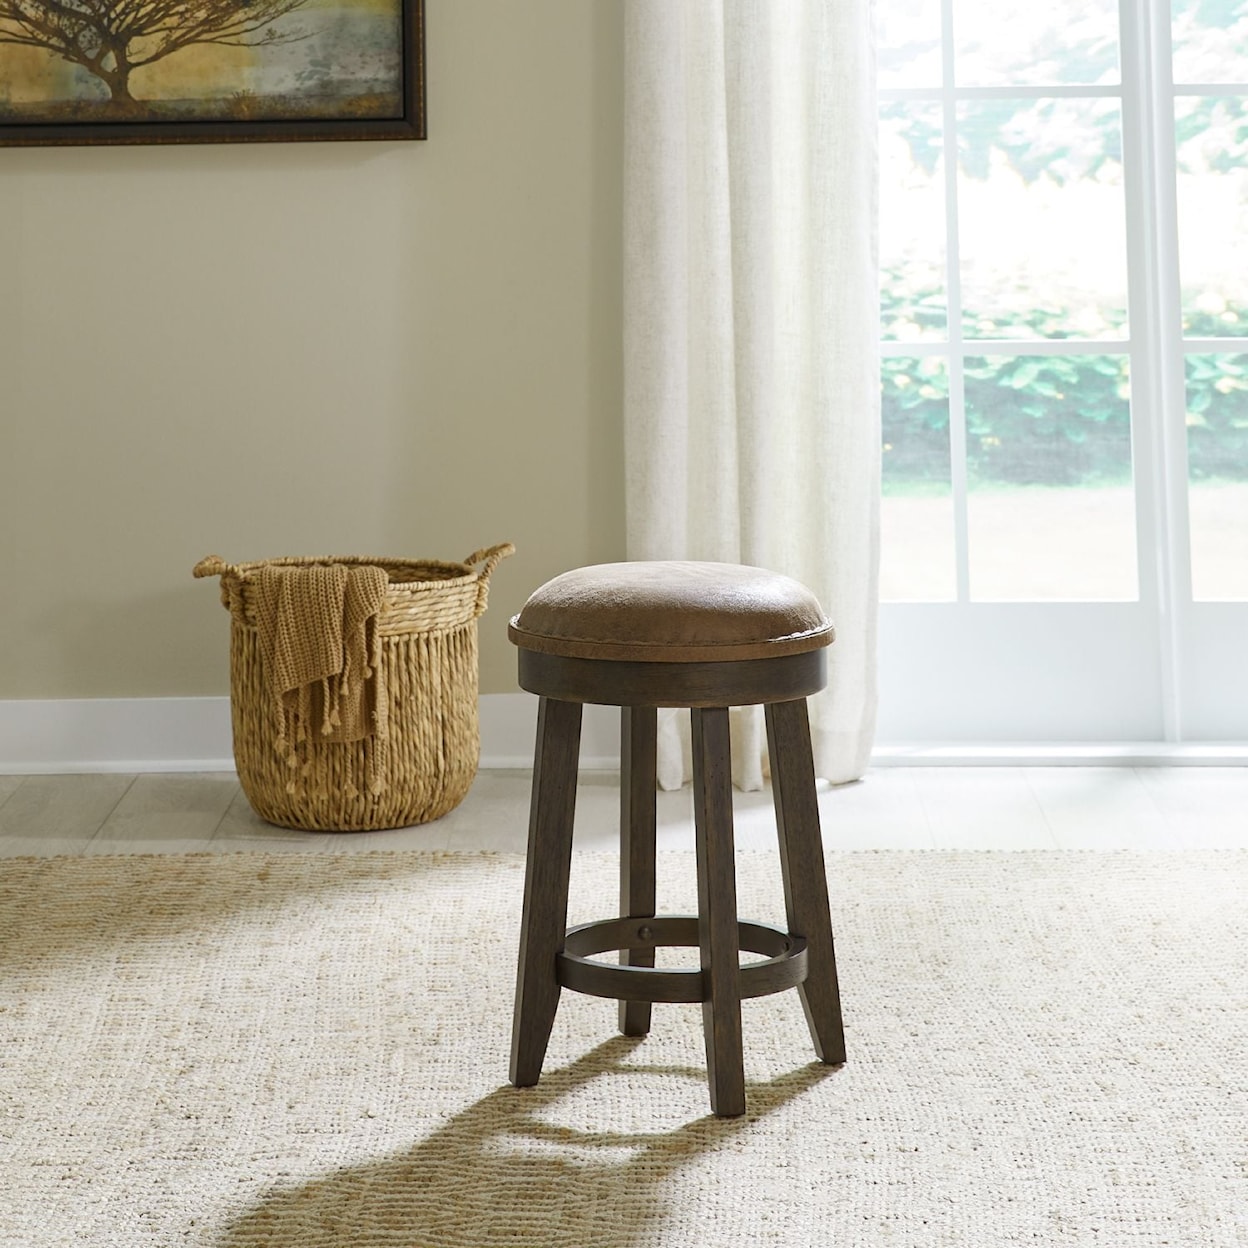 Libby Paradise Valley Upholstered Console Stool